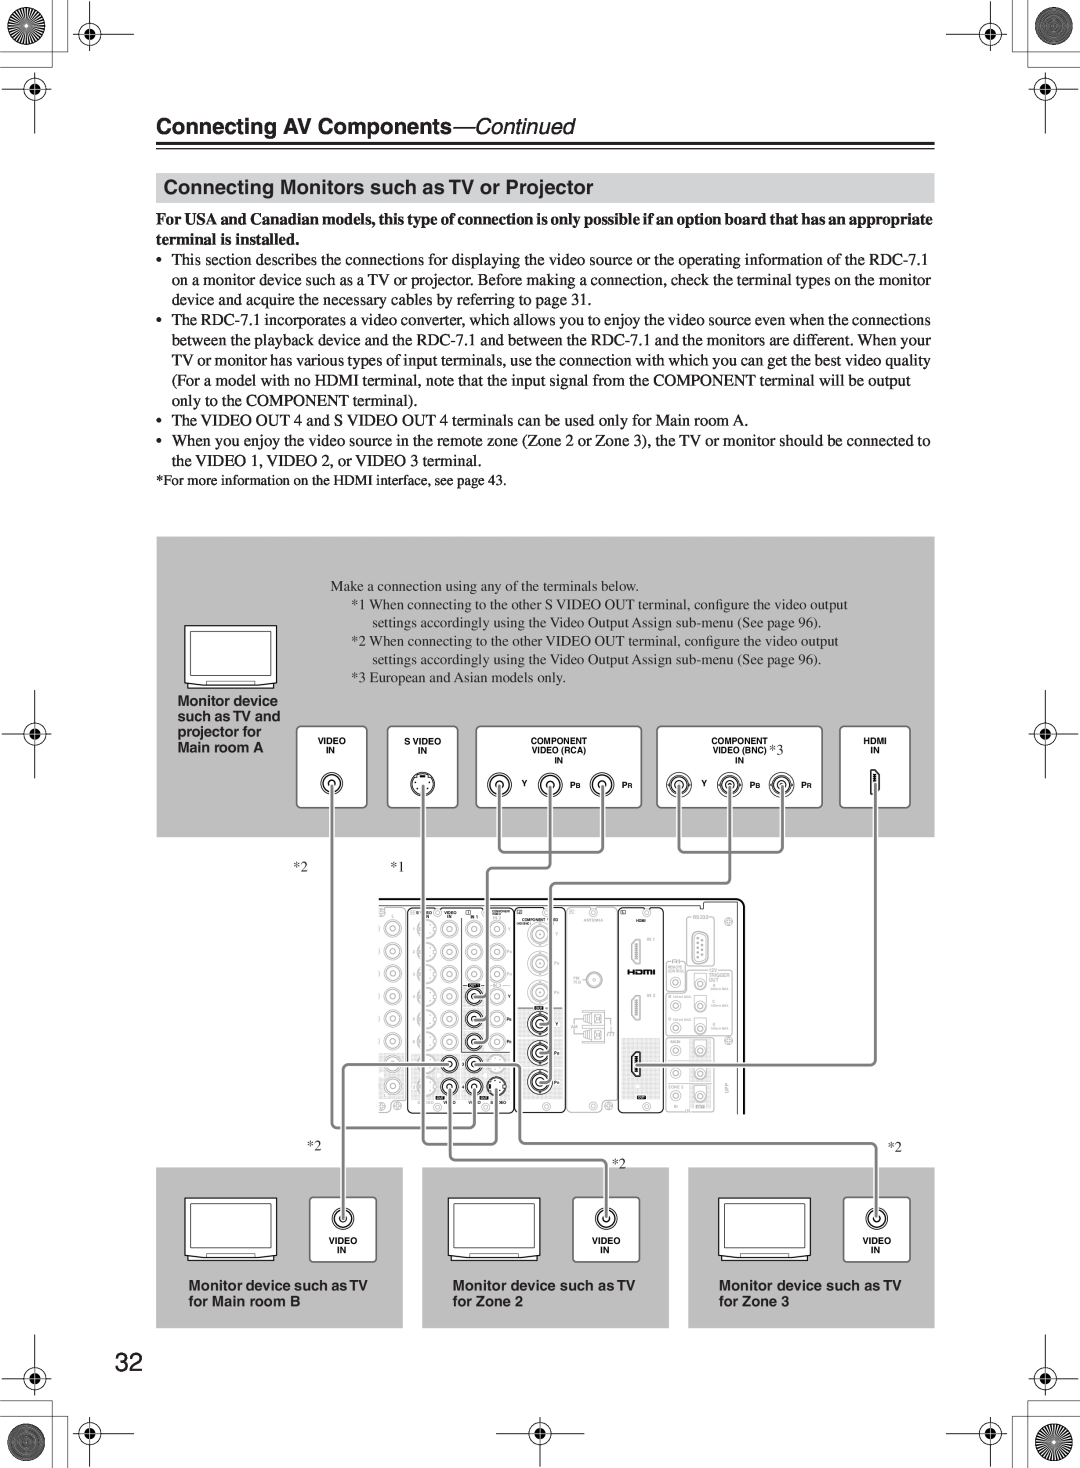 Integra RDC-7.1 instruction manual Connecting Monitors such as TV or Projector, Connecting AV Components—Continued 